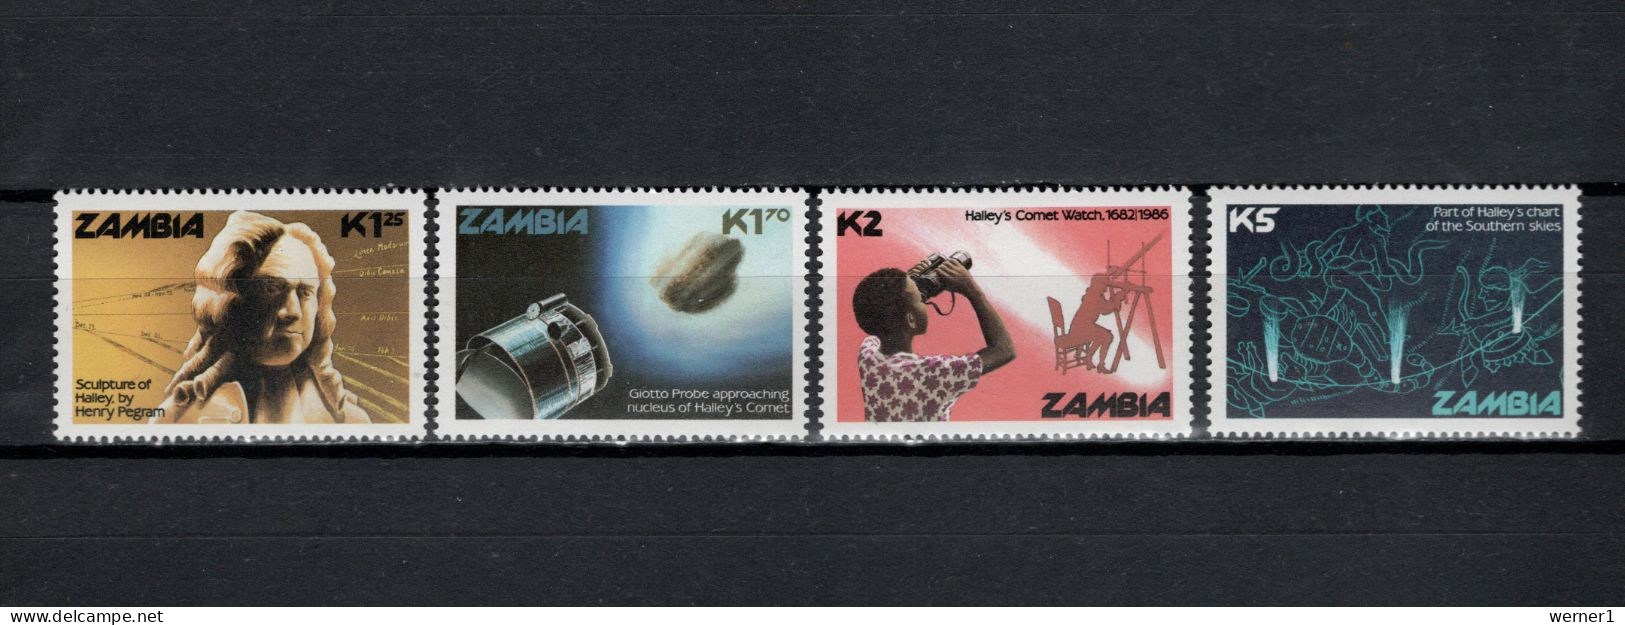 Zambia 1986 Space, Halley's Comet Set Of 4 MNH - Africa